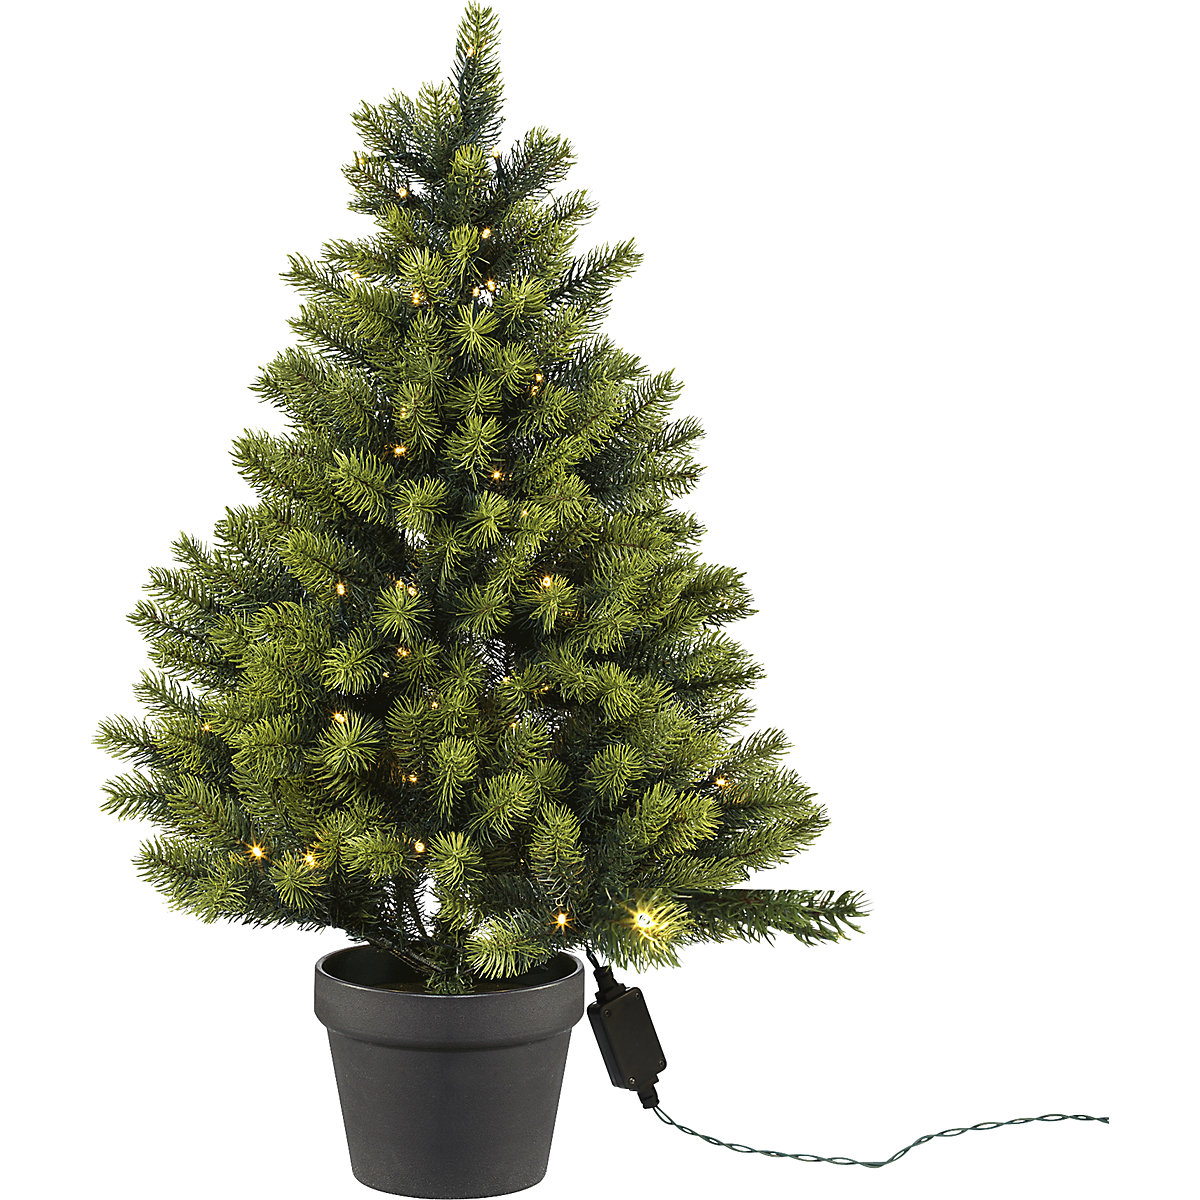 Fir tree in a pot with LEDs